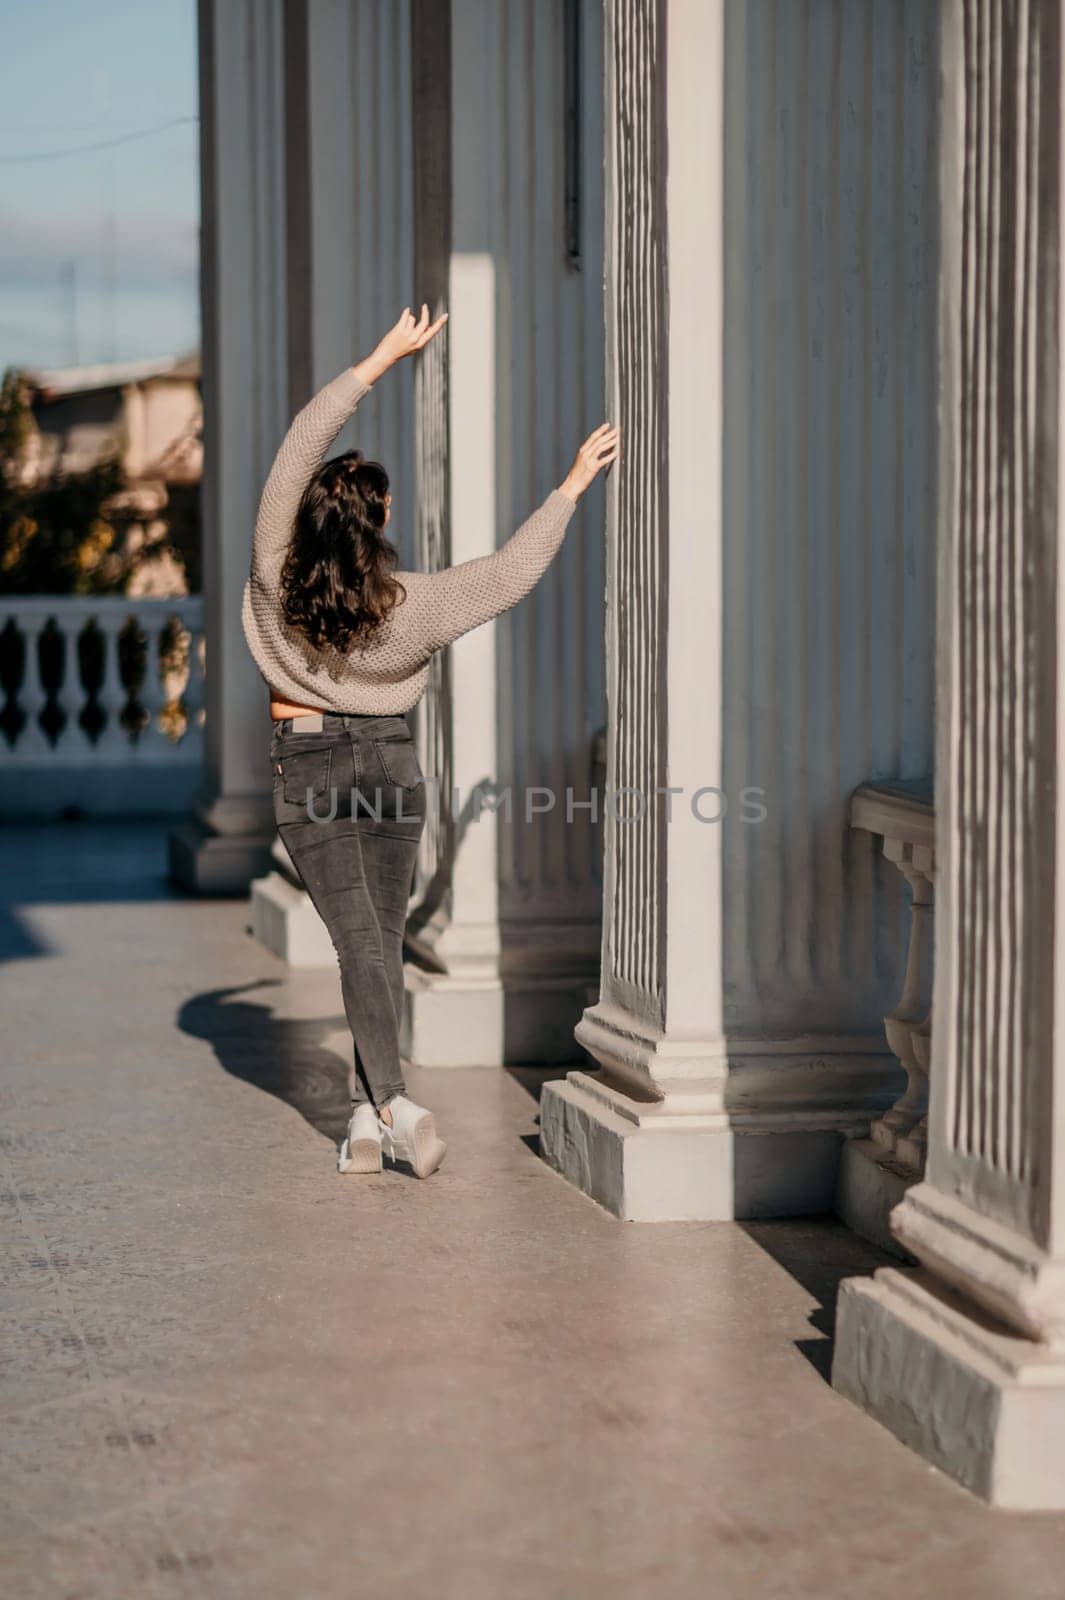 Woman building columns. An athletic woman in her 40s, dressed in a beige sweater and black jeans, poses near the pillars of a building. Walking around the city, tourism. by Matiunina